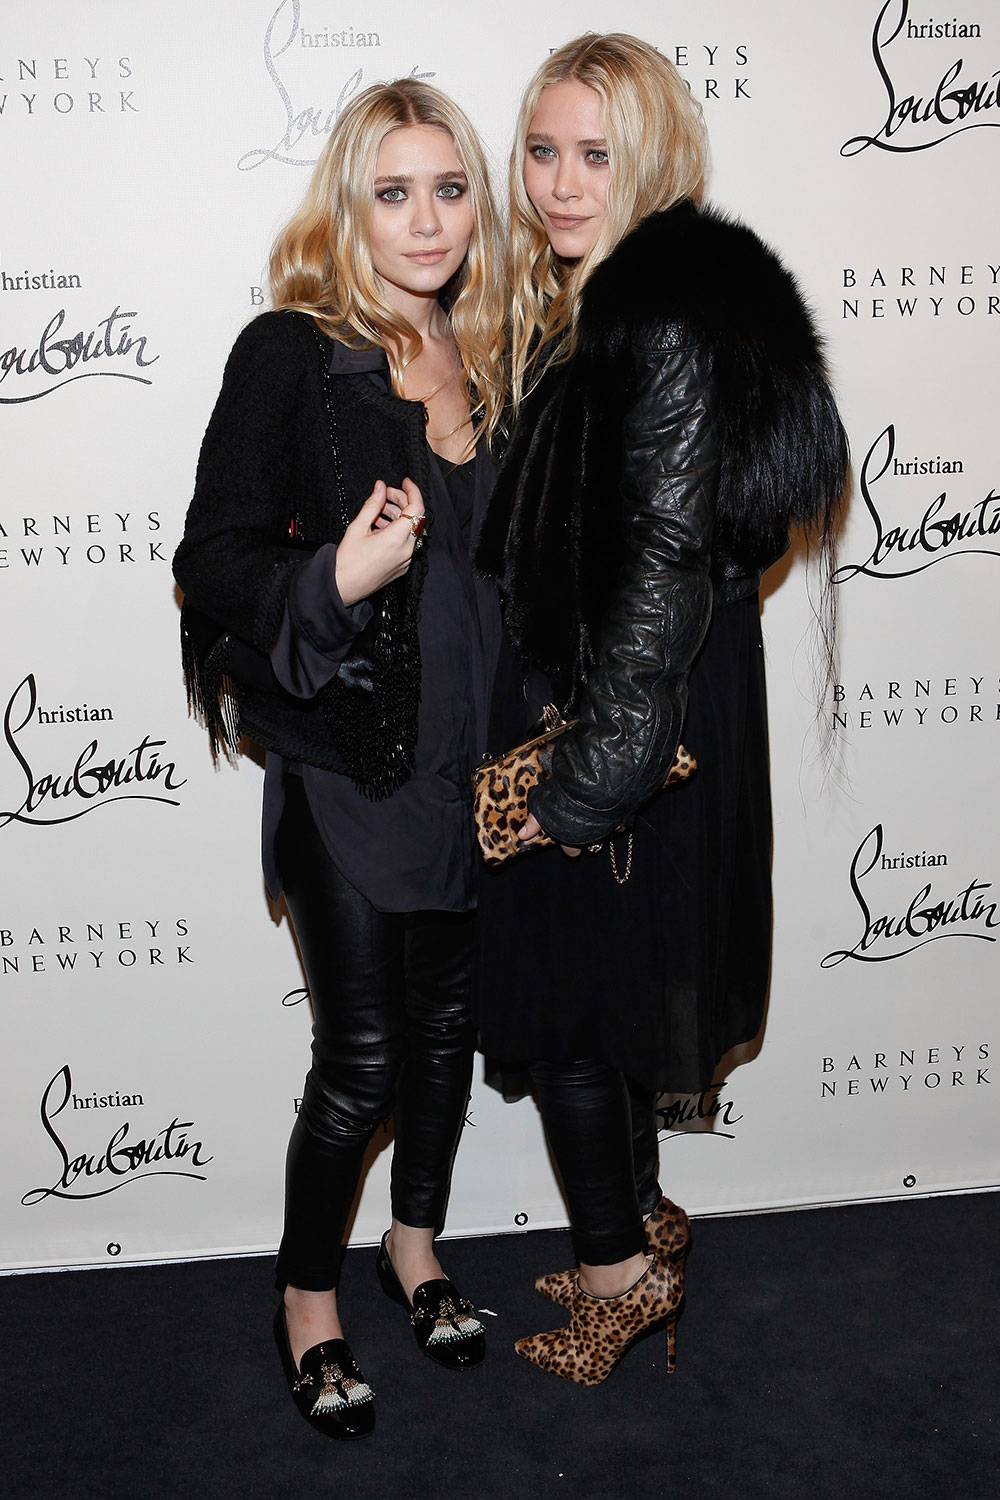 Mary-Kate and Ashley Olsen at the Christian Louboutin Cocktail party in 2011